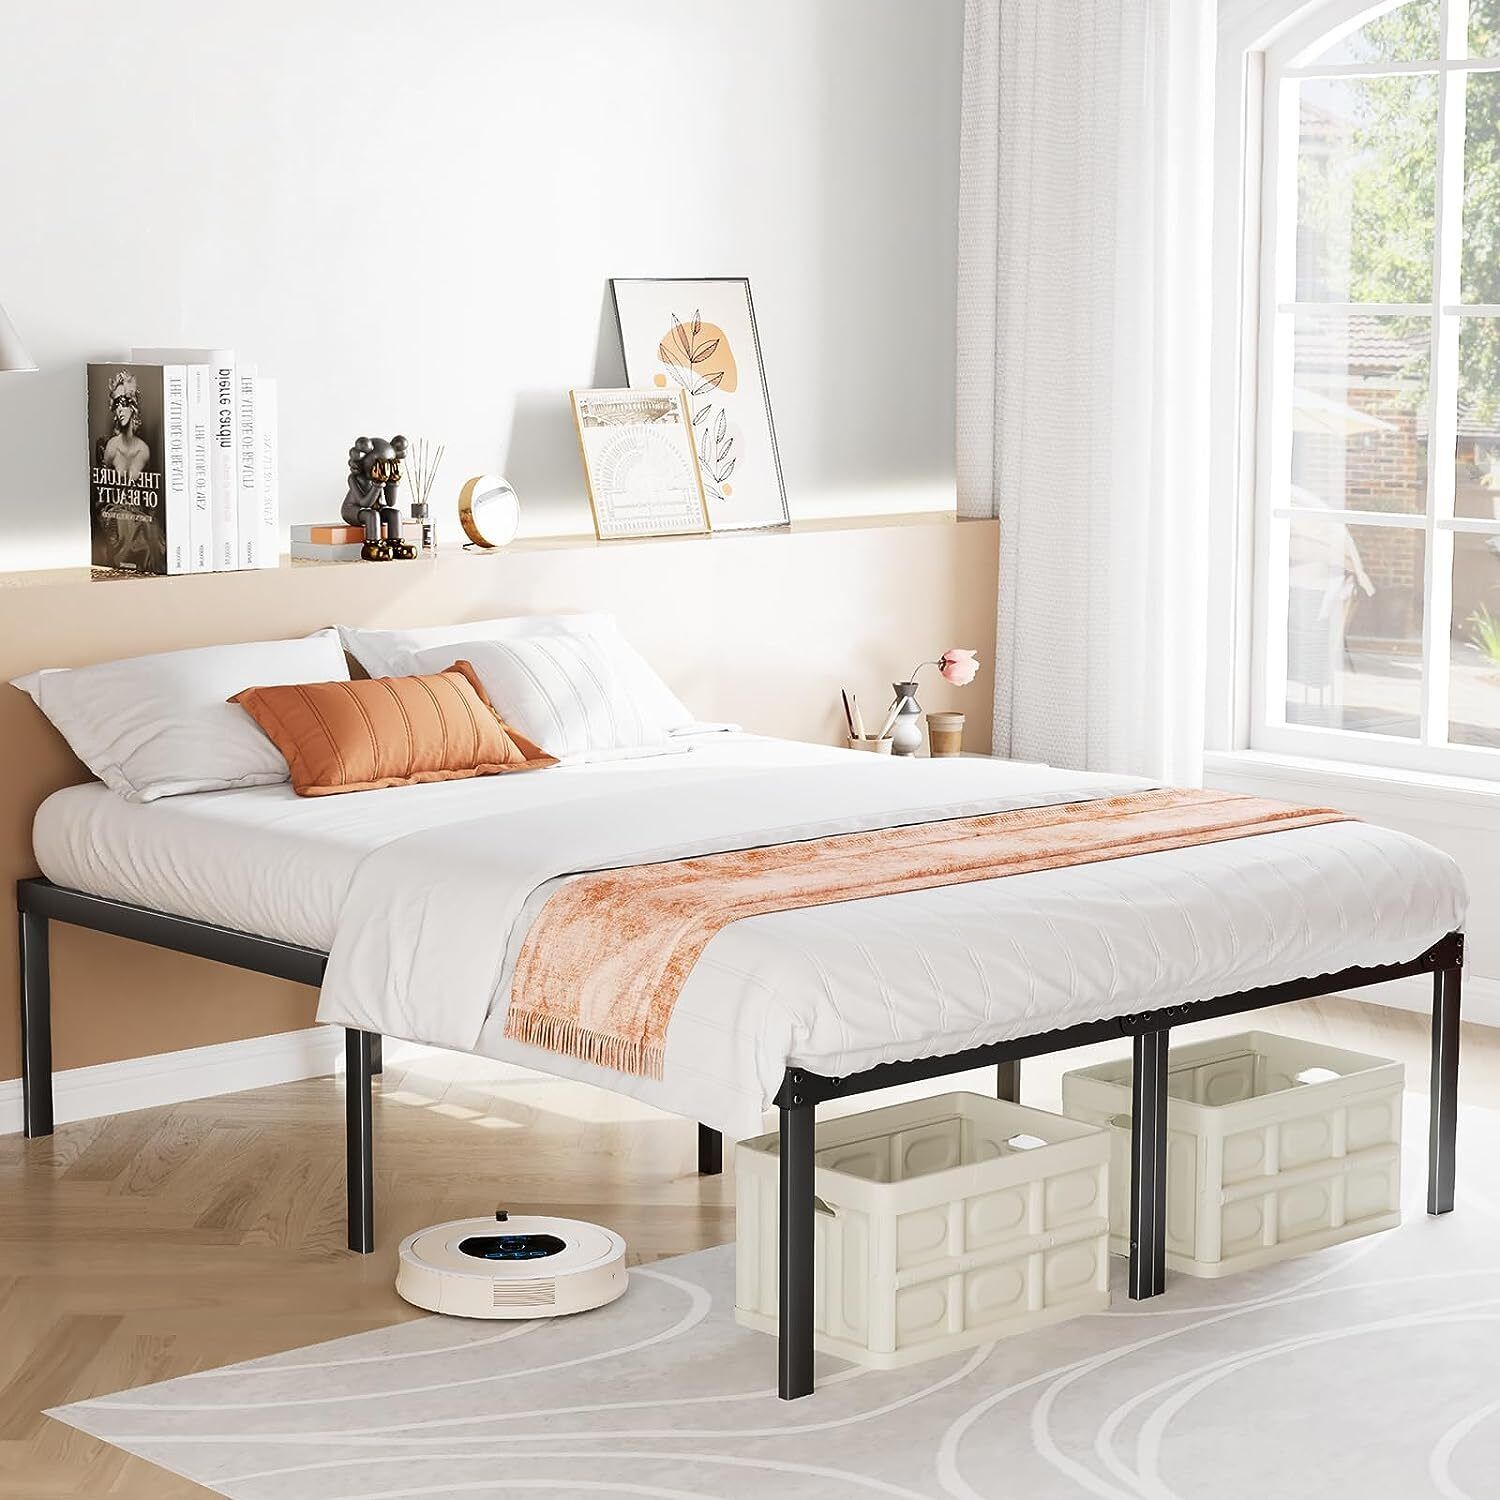 14 Inch King sized bed frame